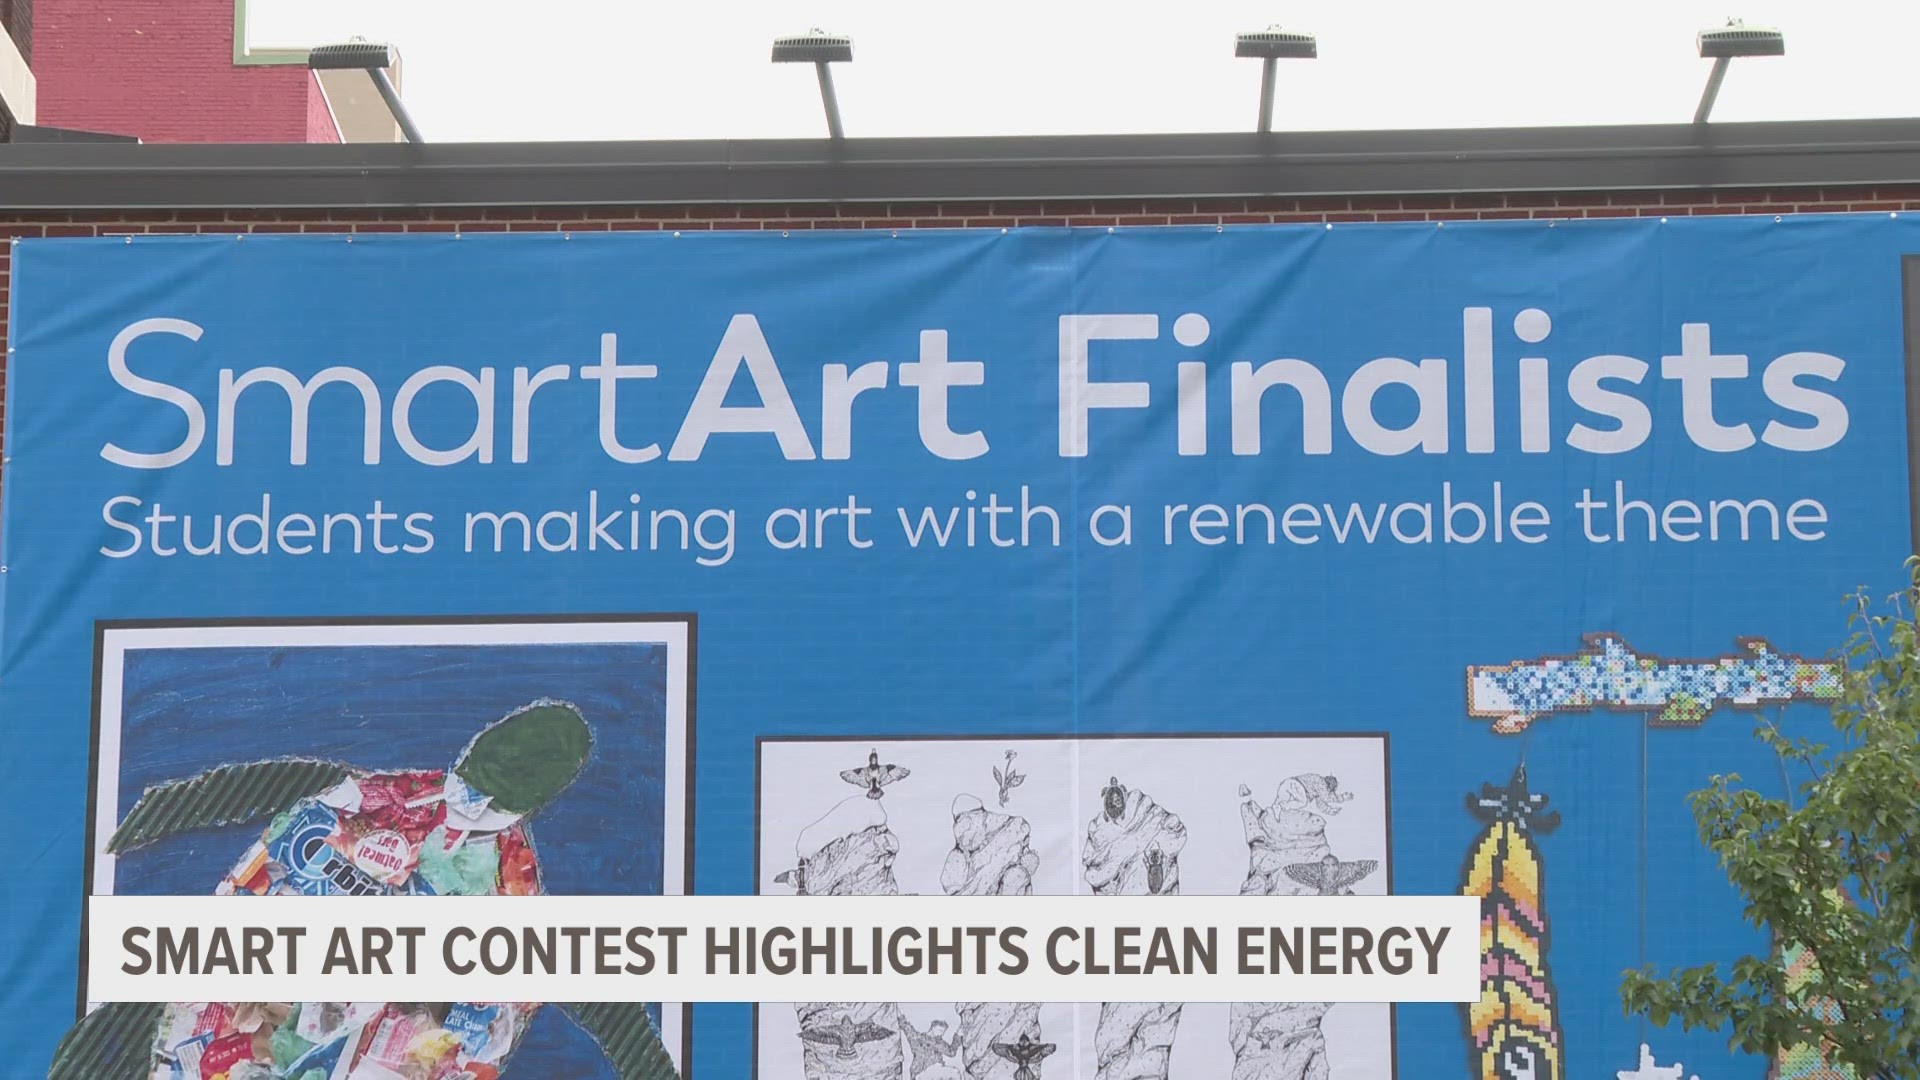 SmartArt is an annual contest to get young artists thinking about our impact on the planet.